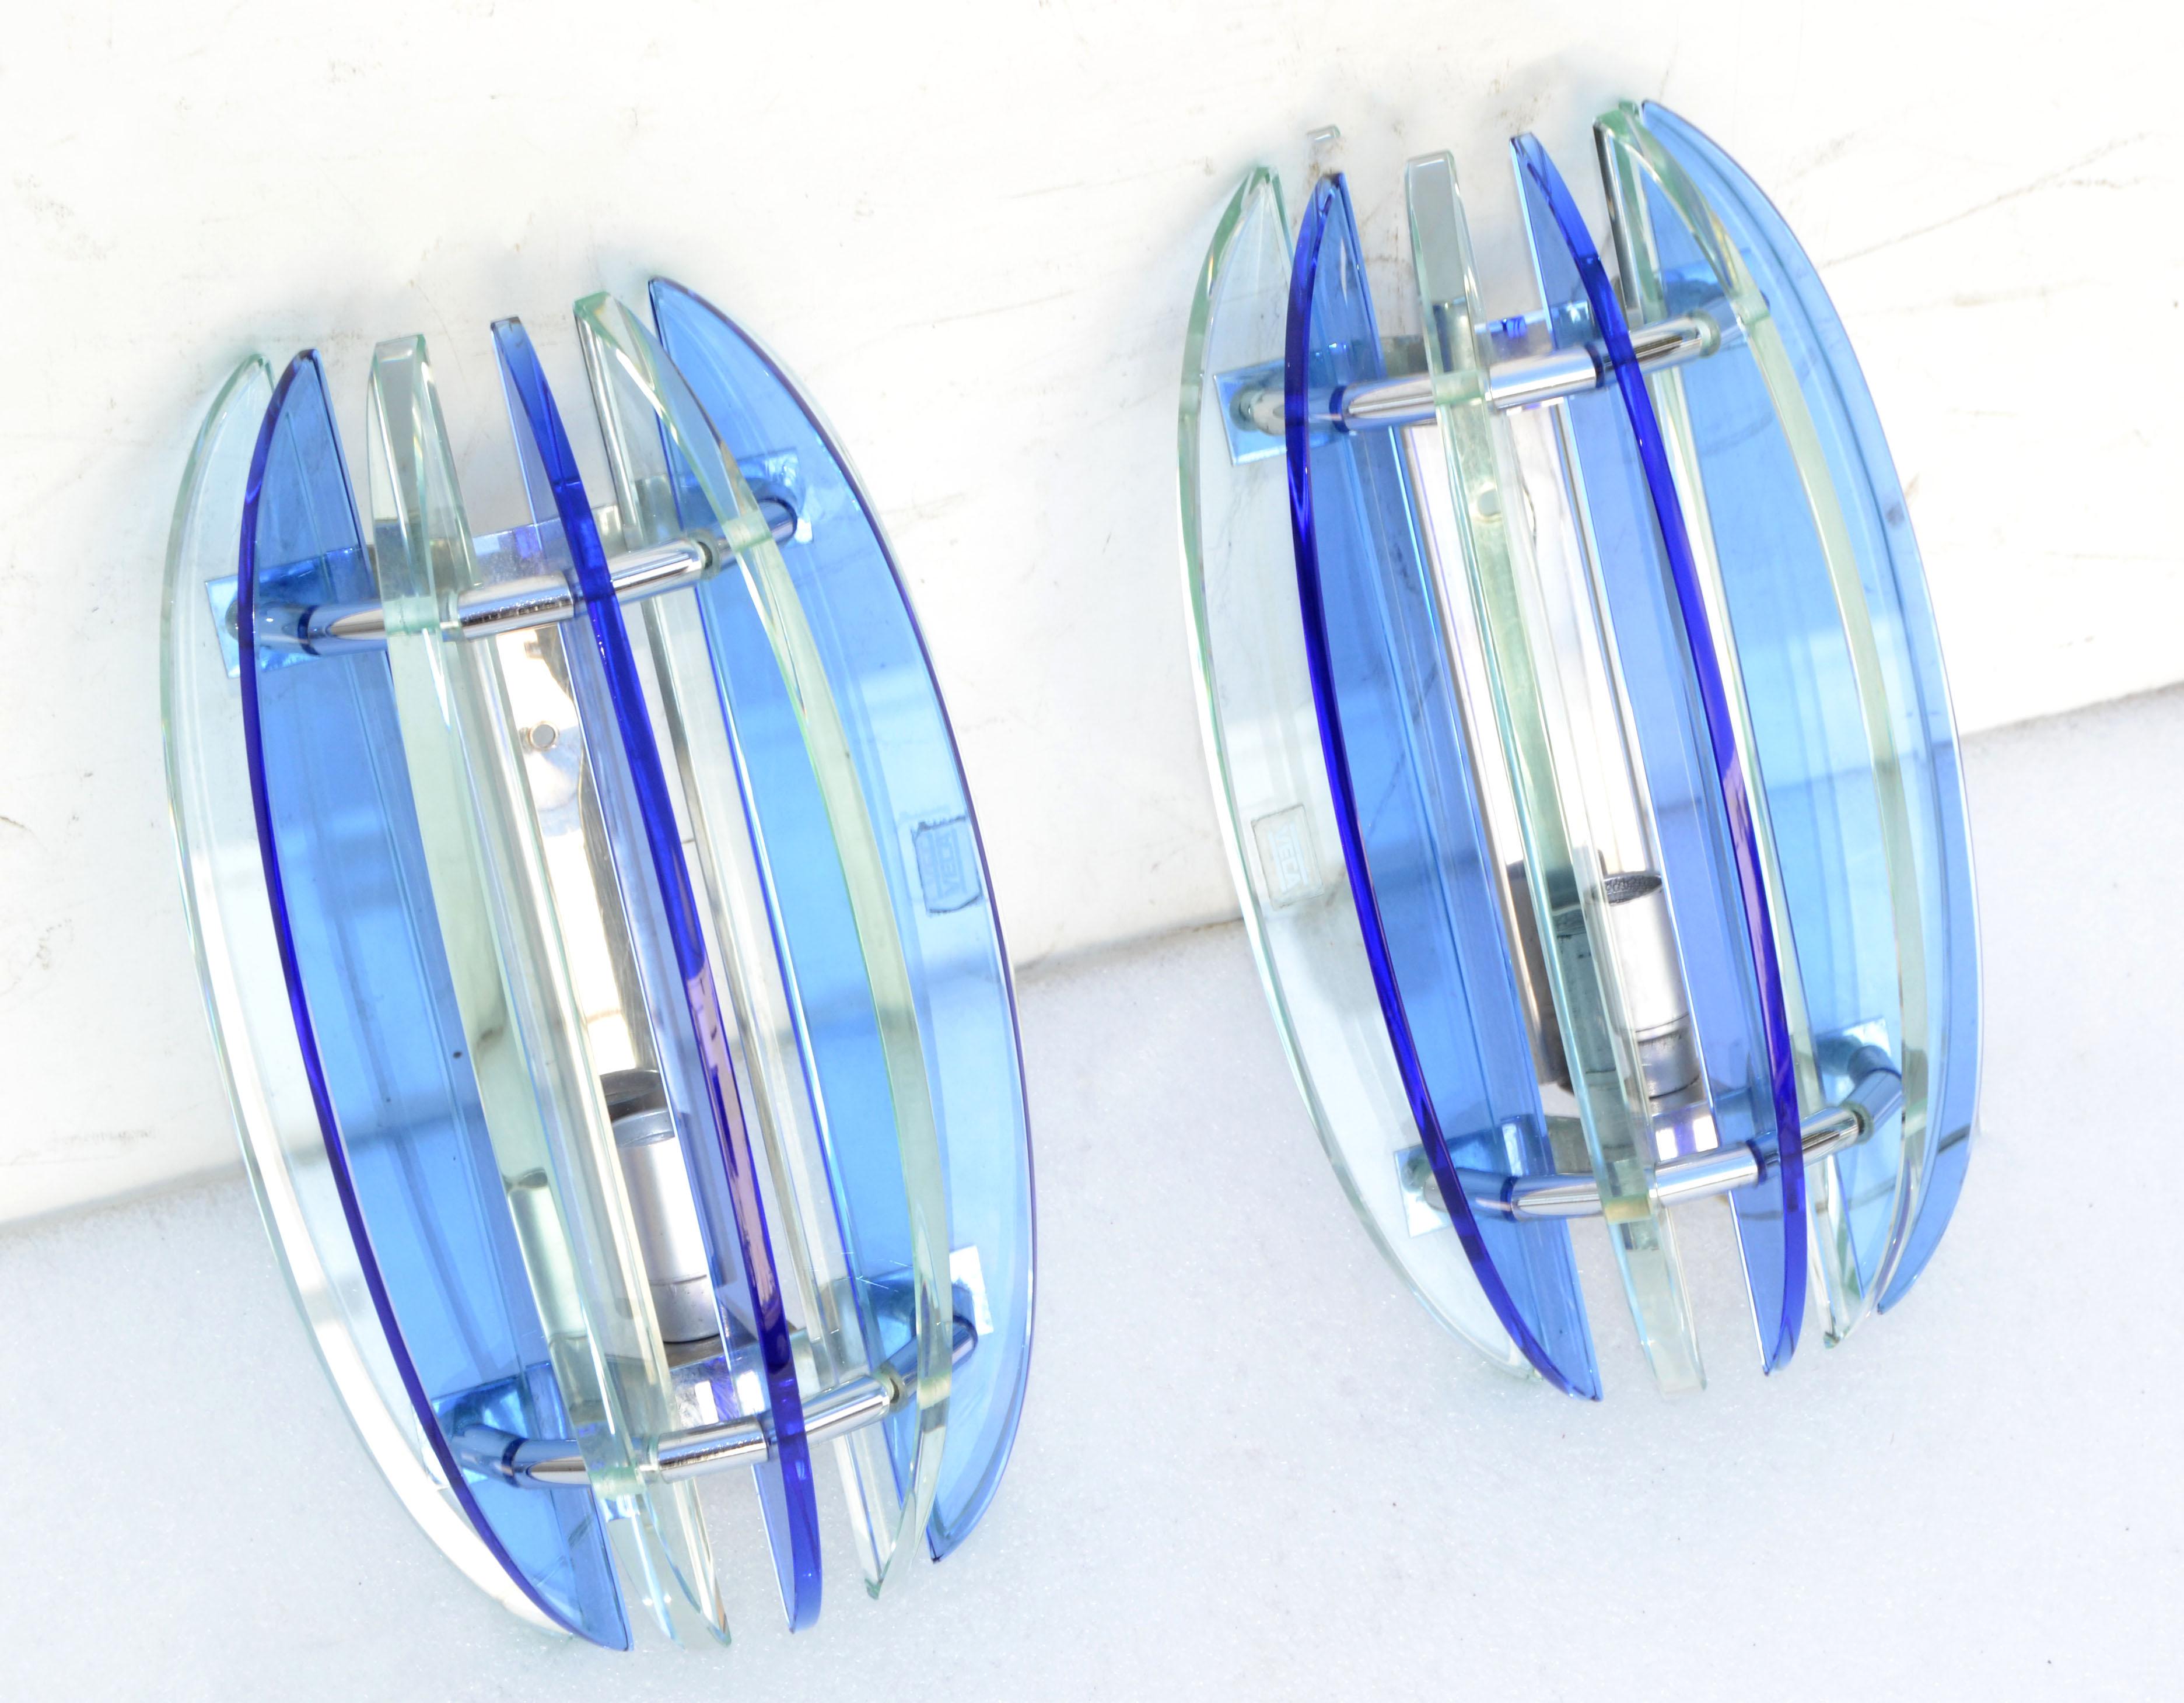 Superb pair of blue and clear glass blades Sconces by Veca.
We have 2 pair available, priced by pair.
US rewired and each Sconce takes one light, 60 watt max.
Back Plate measures: 6.25 x 1.5 x 0.25 inches height.
Projection of the Wall: 4.5